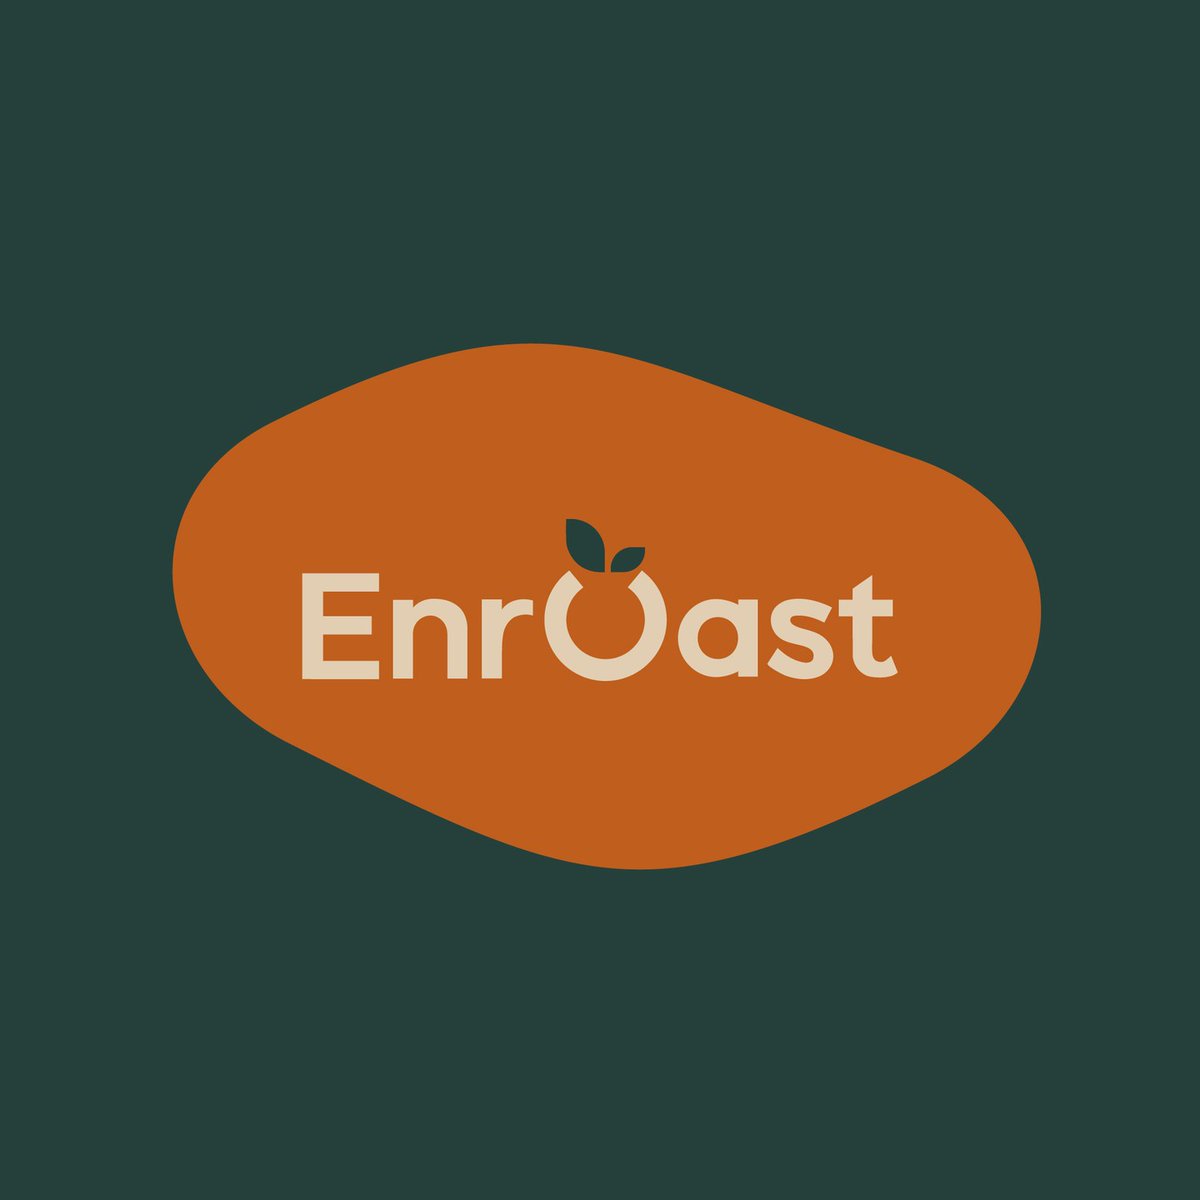 Logo and Packaging design for Roasted Coffee Brand Enroast®

Do you need to create a logo or identity? 
I am open for cooperation
Whatsapp : +917470736192
Email : abhay@famebro.com
#brand #typography #coffeelogo #cafelogo #coffeebrand #logocoffeeshop #coffeedesign #coffeedrinkers